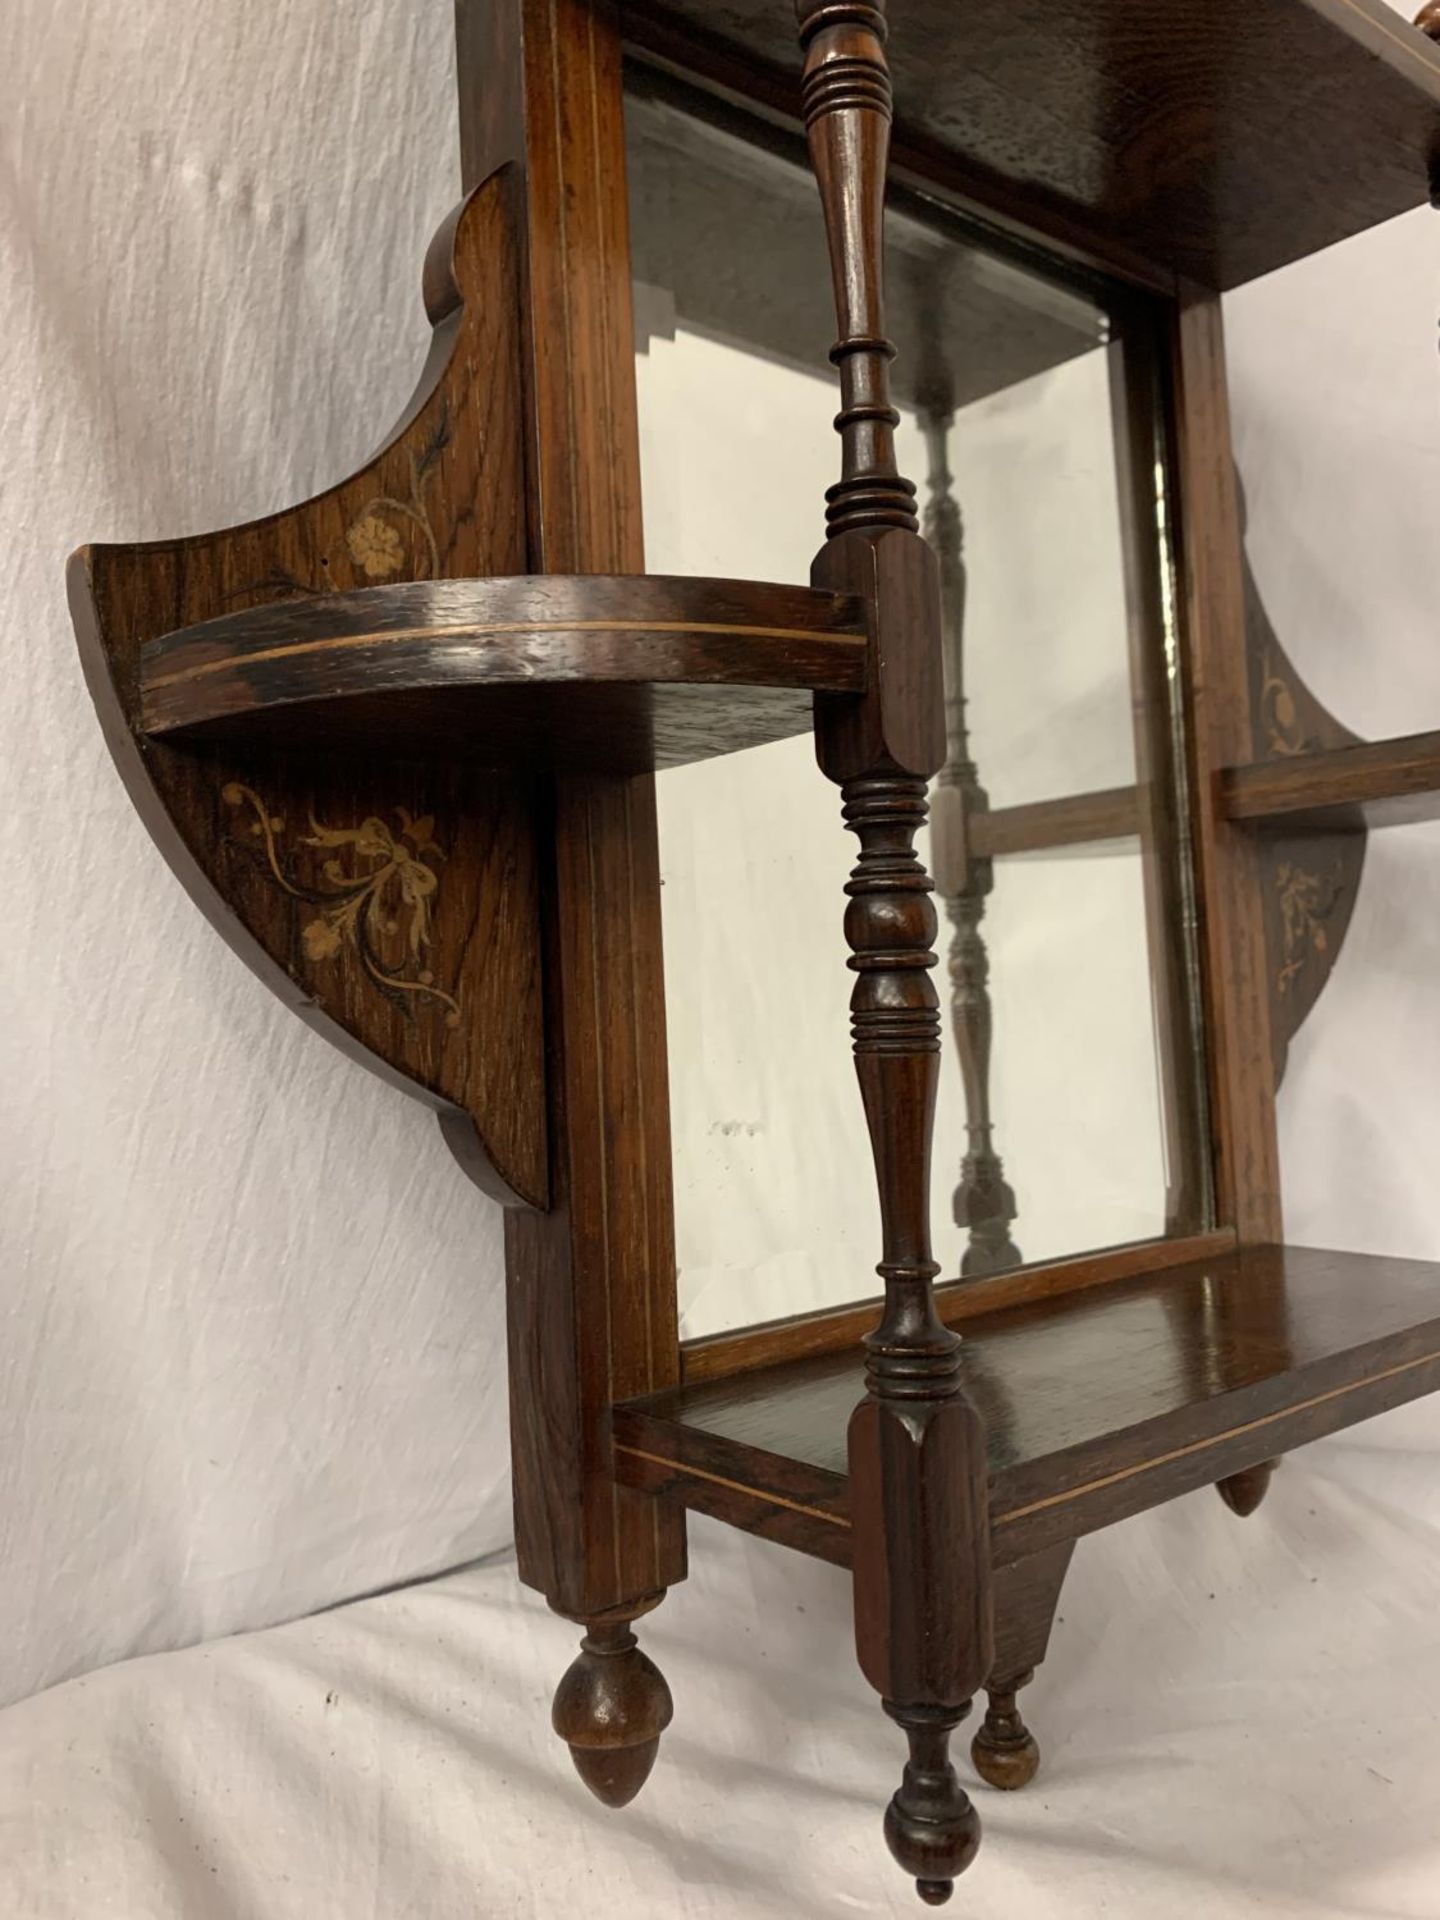 A VINTAGE MAHOGANY HALL MIRROR SHELF WITH FINIALS AND INLAY 61CM X 45.5CM - Image 3 of 4